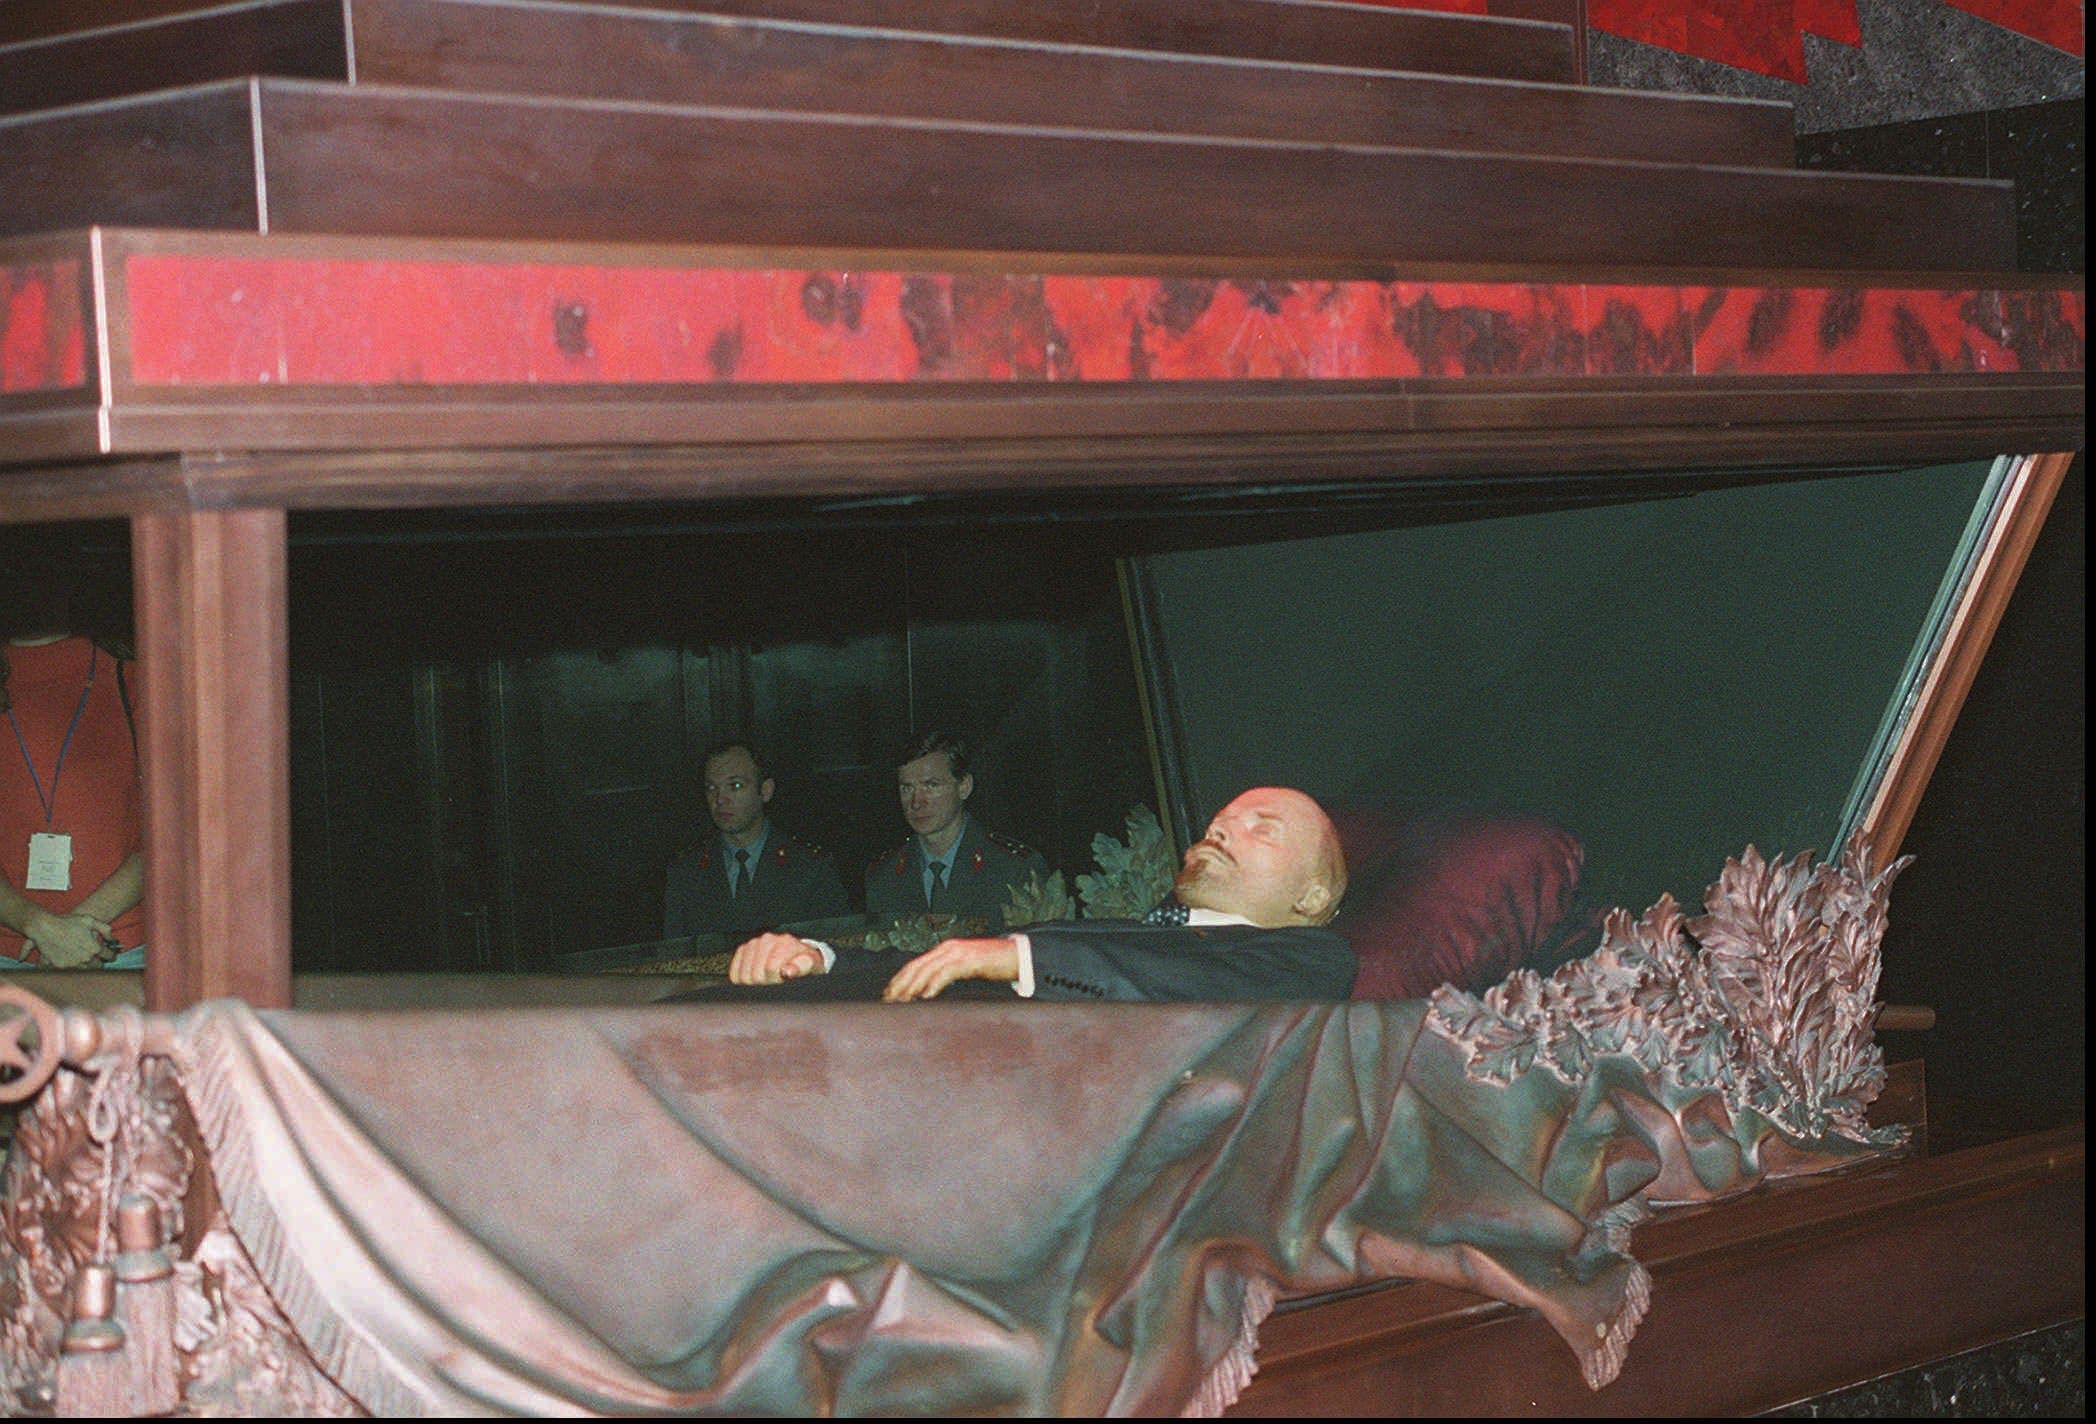 Mummified body of the Soviet Union founder Vladimir Lenin lies behind the glass in the granite-and-marble mausoleum outside the Kremlin wall in Moscow, November 30, 1994. (AP)